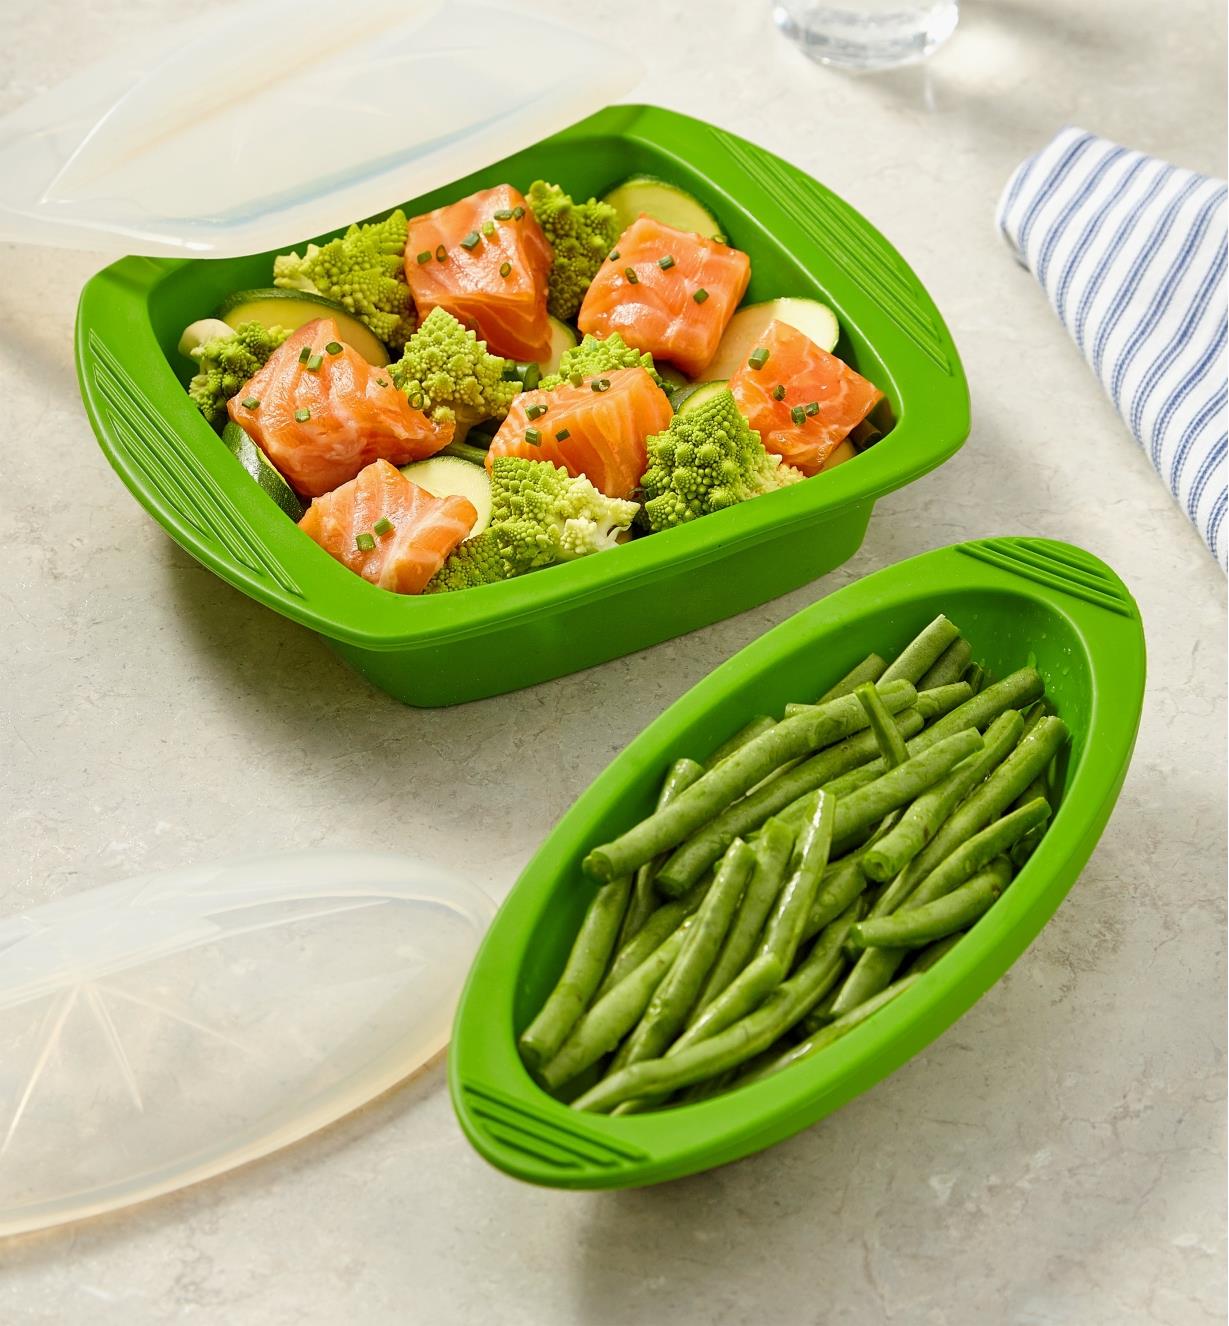 Two silicone steam cookers being used to prepare green beans and a dish of salmon and vegetables